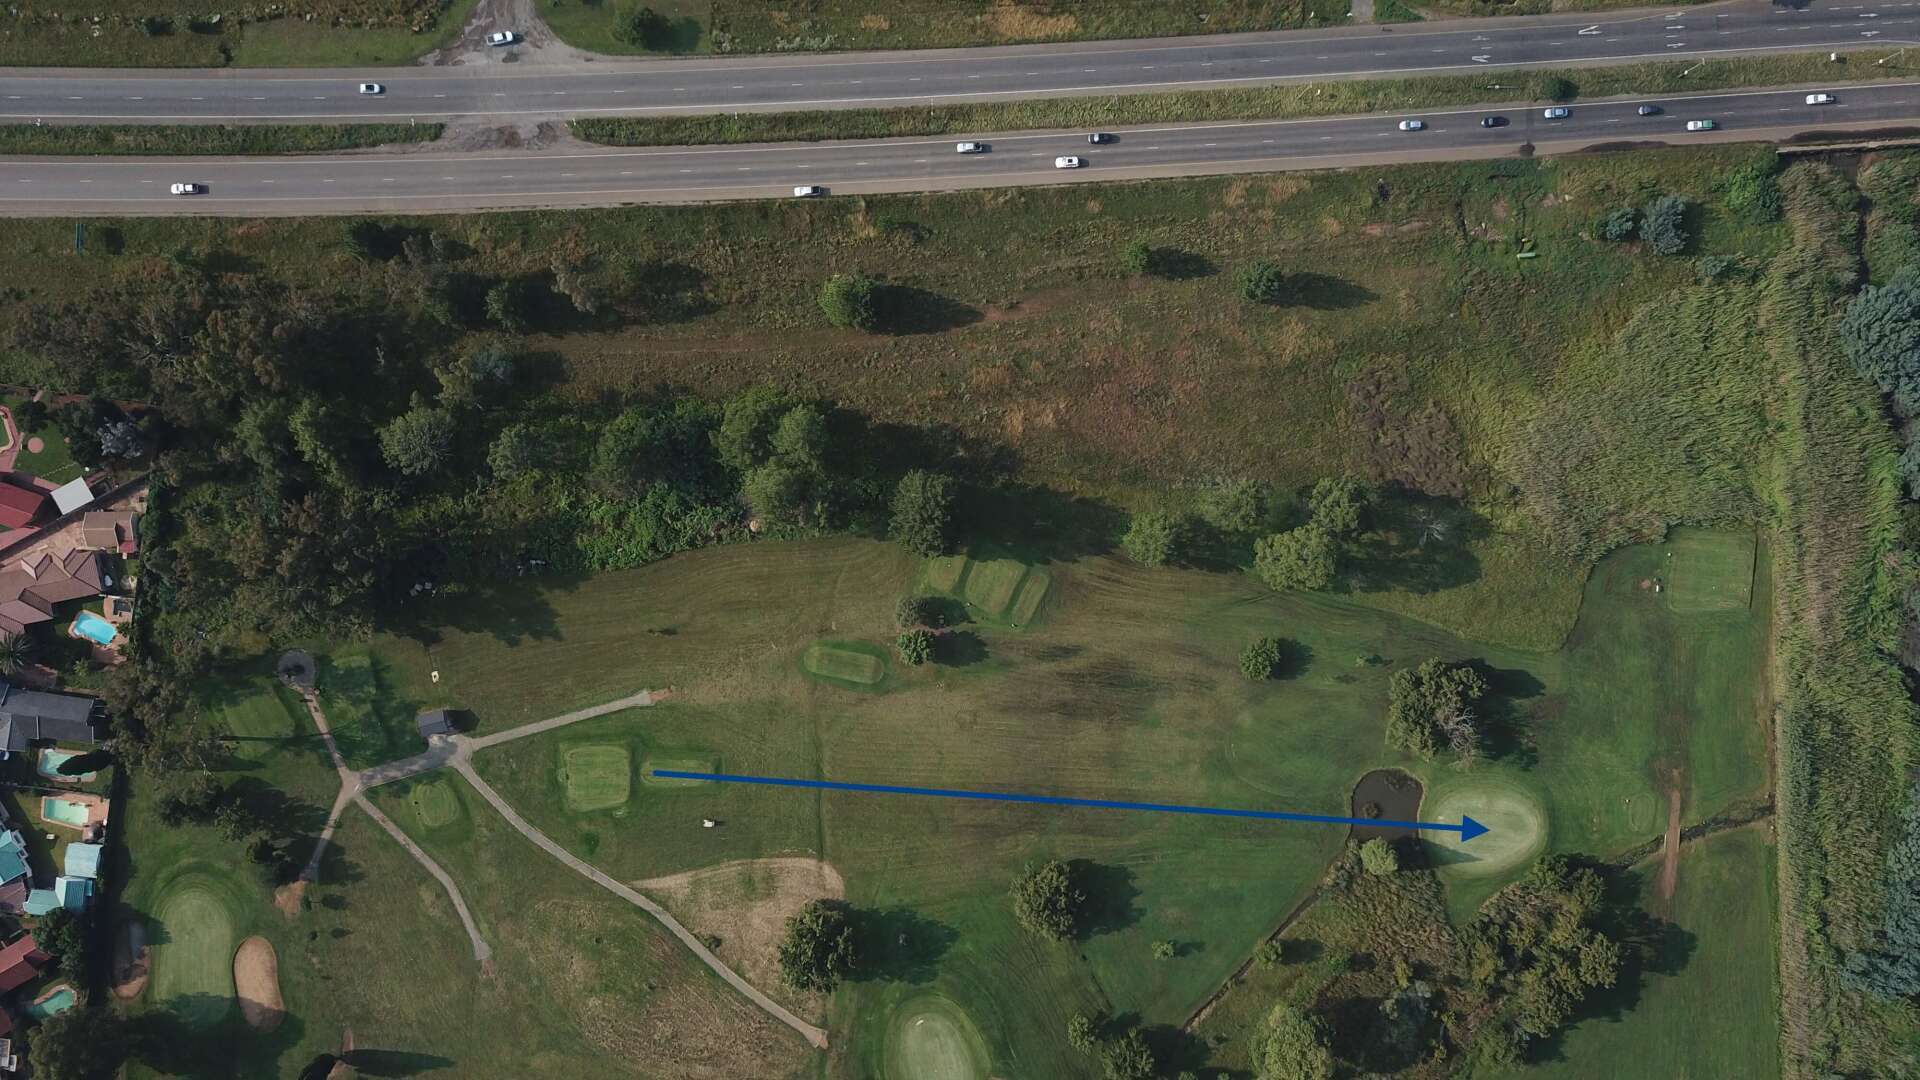 Hole 5 of the course